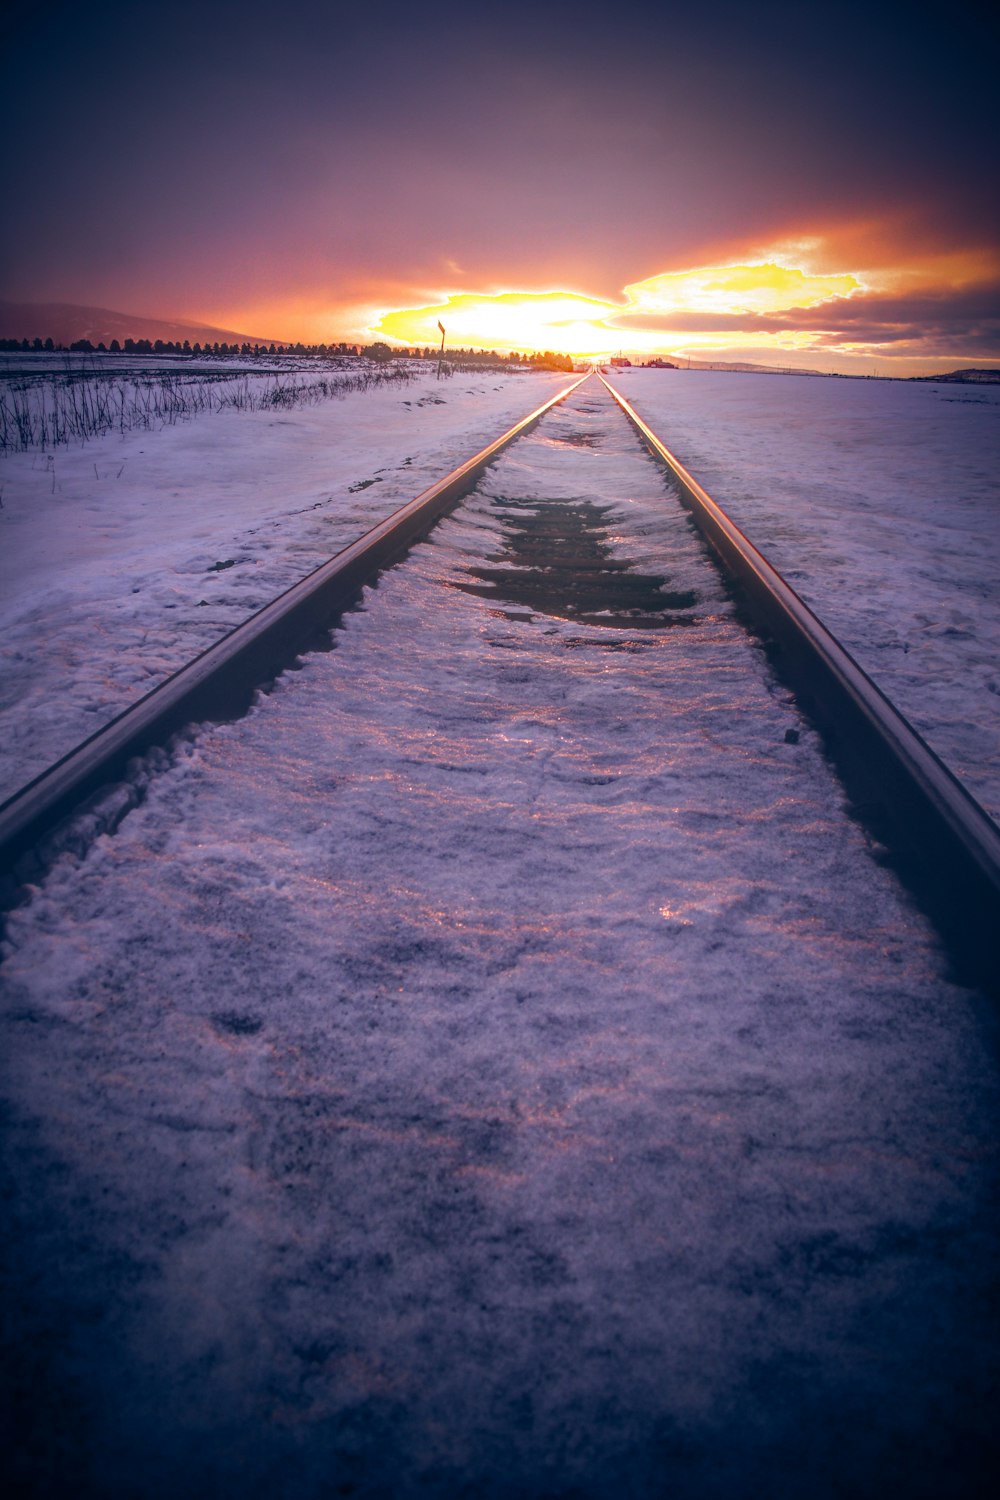 black metal railings on snow covered ground during sunset